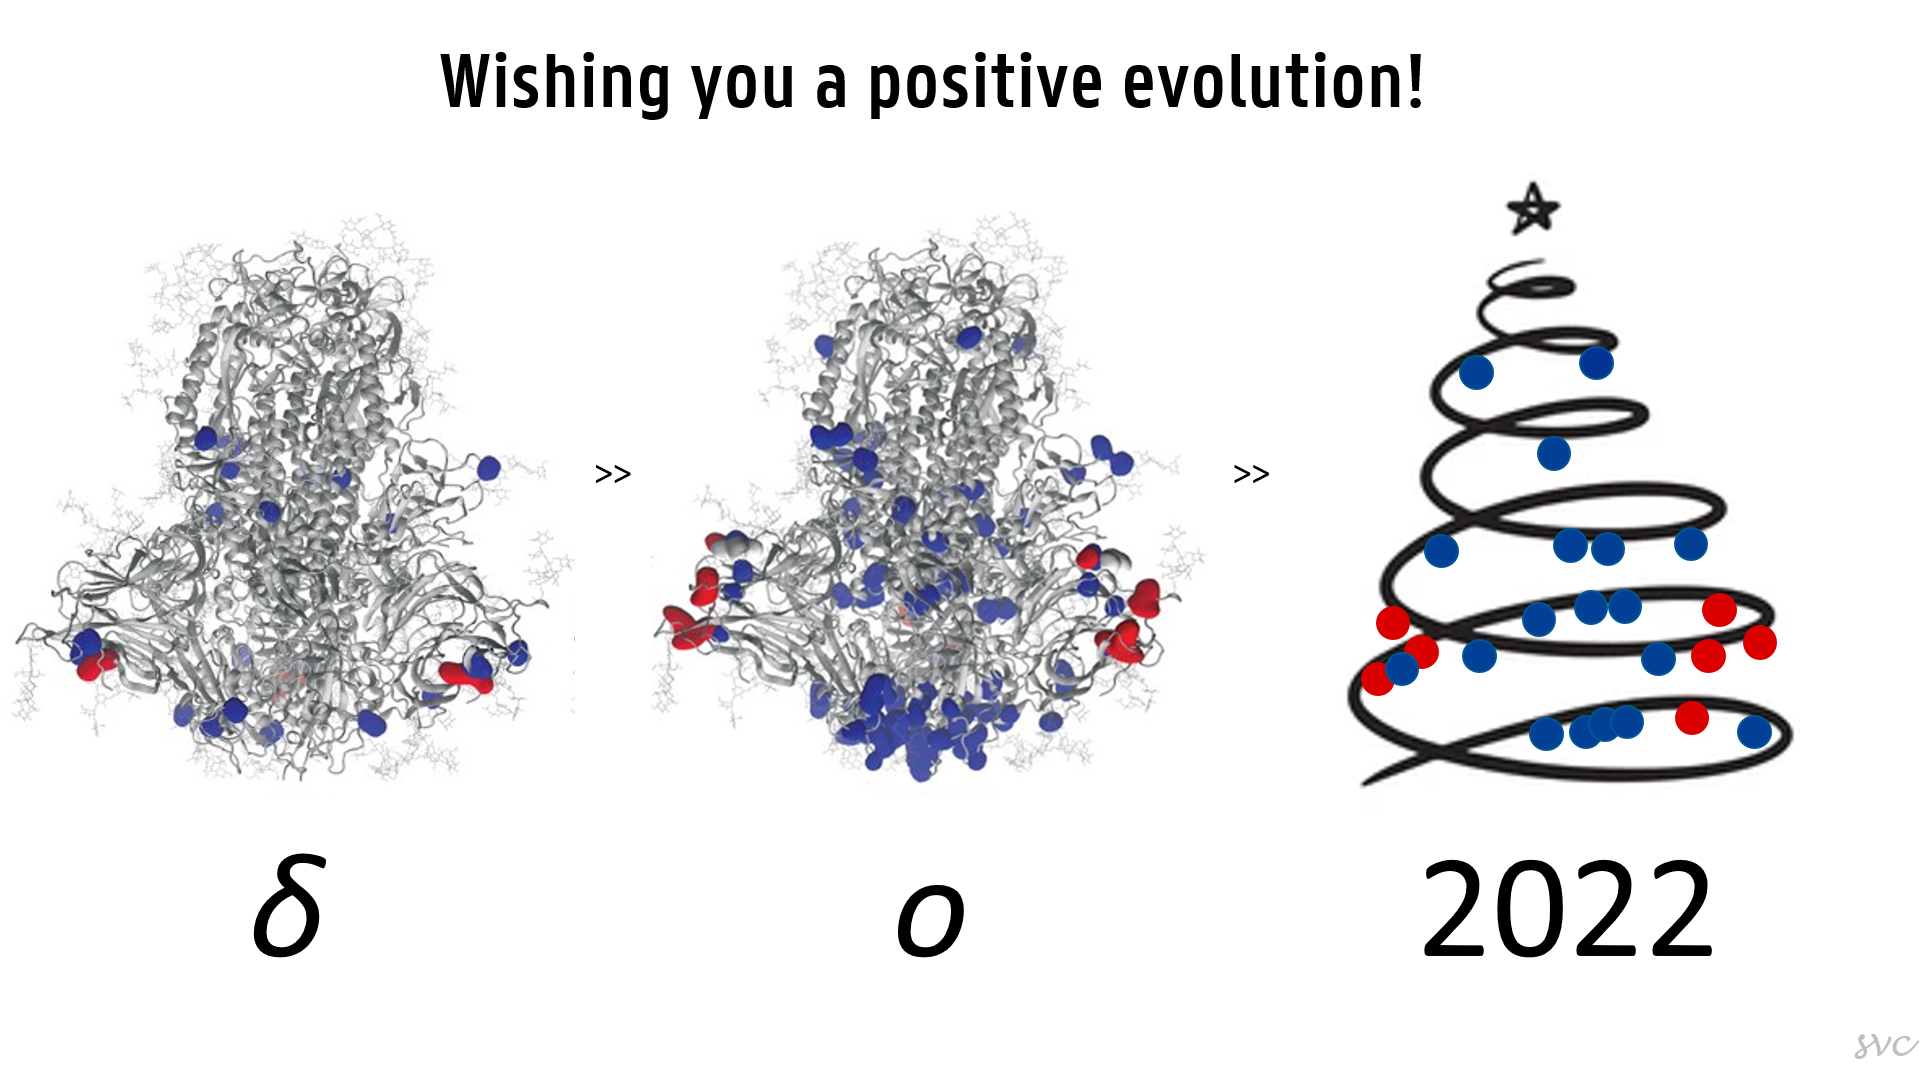 Wishing you a positive evolution!